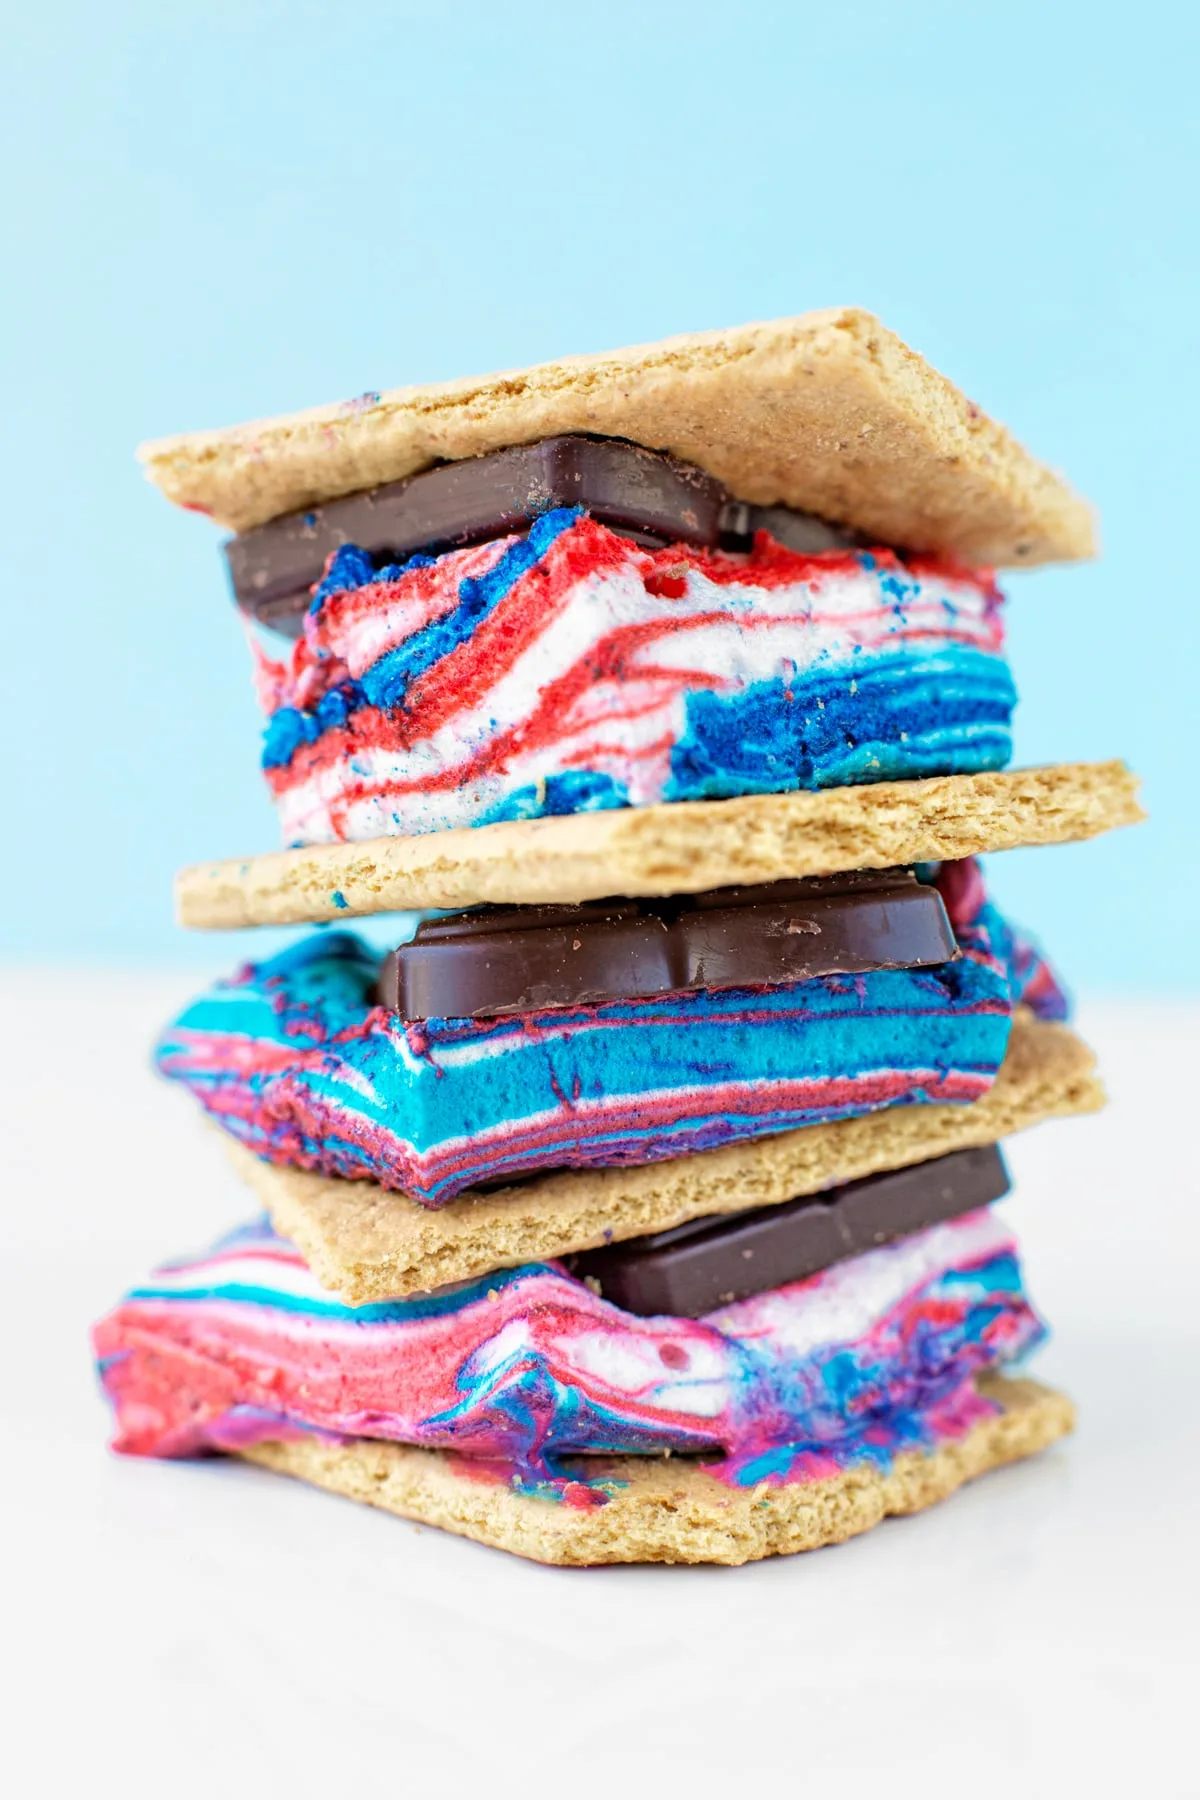 Red, White and Blue S'mores | 4th of July party ideas, 4th of July desserts and more from @cydconverse